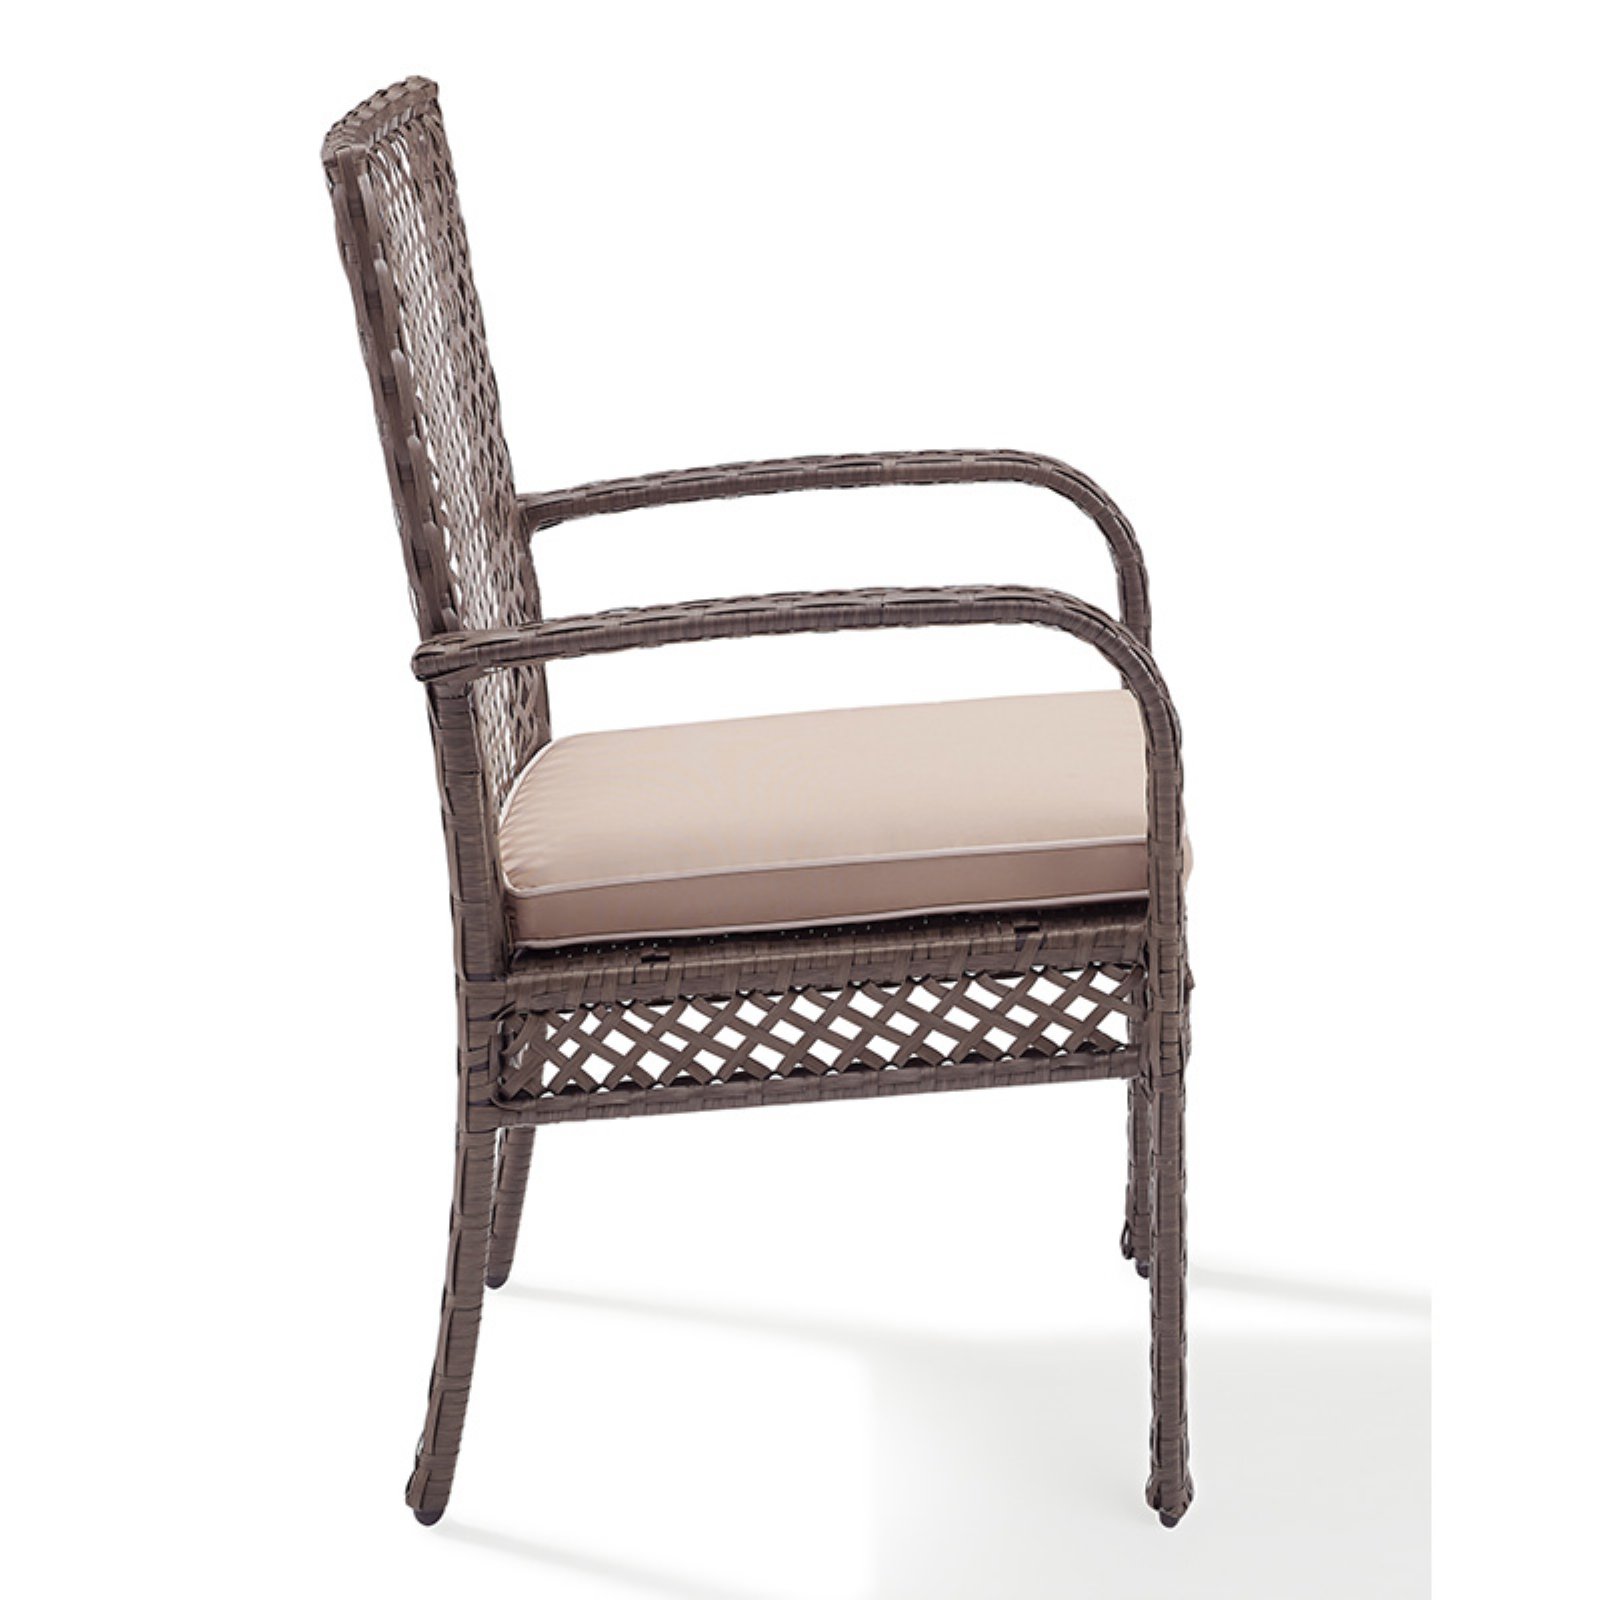 Crosley Furniture Tribeca Wicker Patio Dining Arm Chair in Driftwood - image 3 of 6